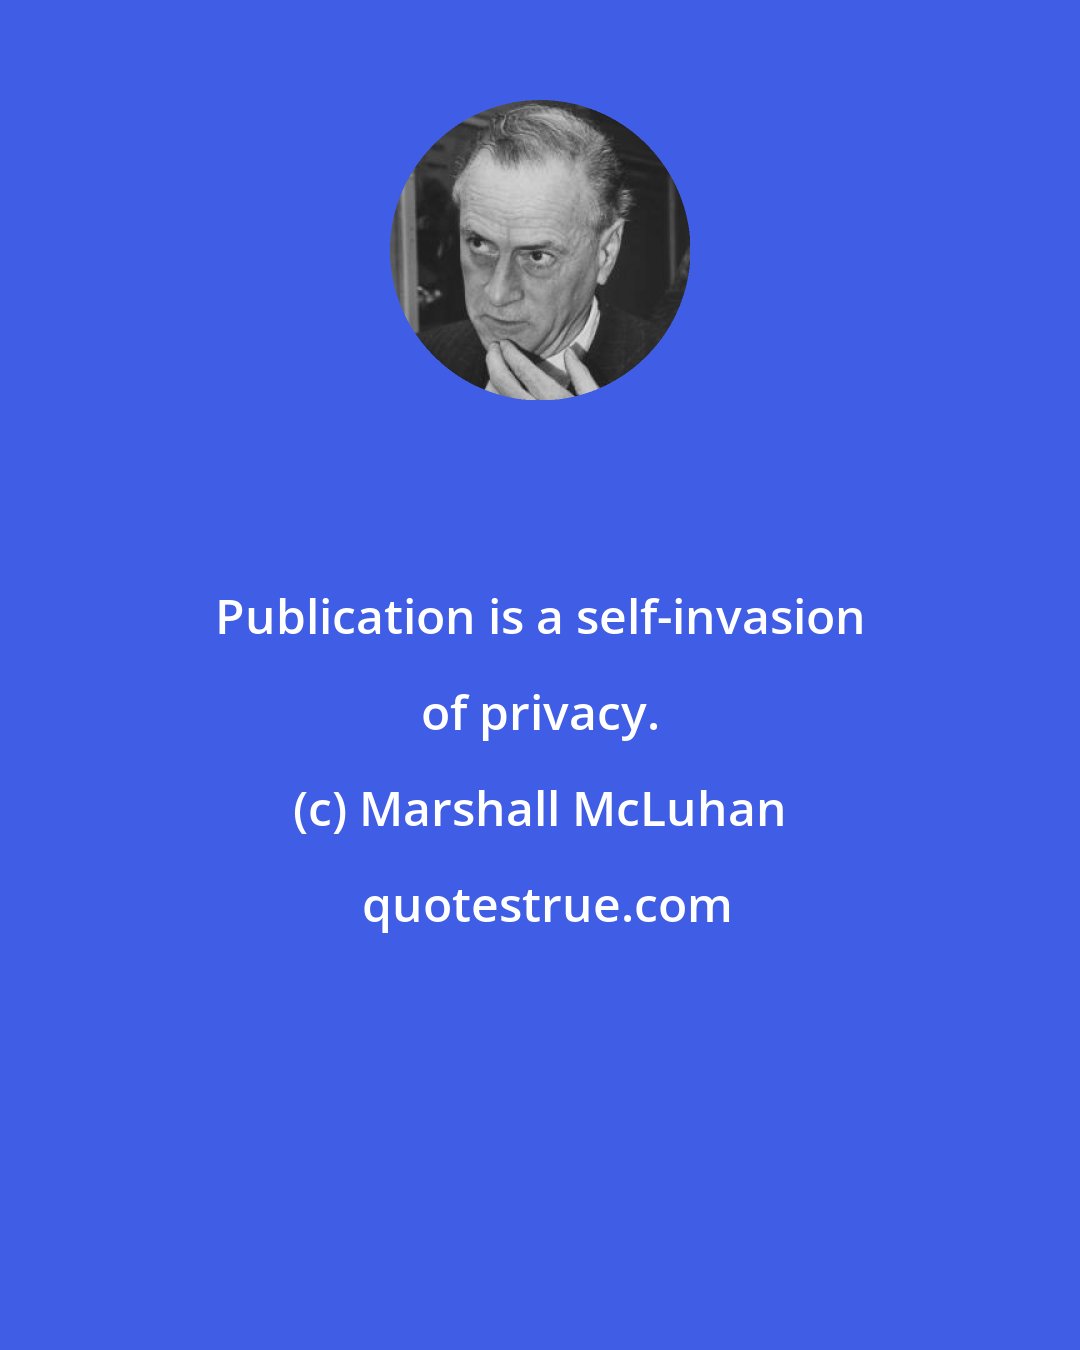 Marshall McLuhan: Publication is a self-invasion of privacy.